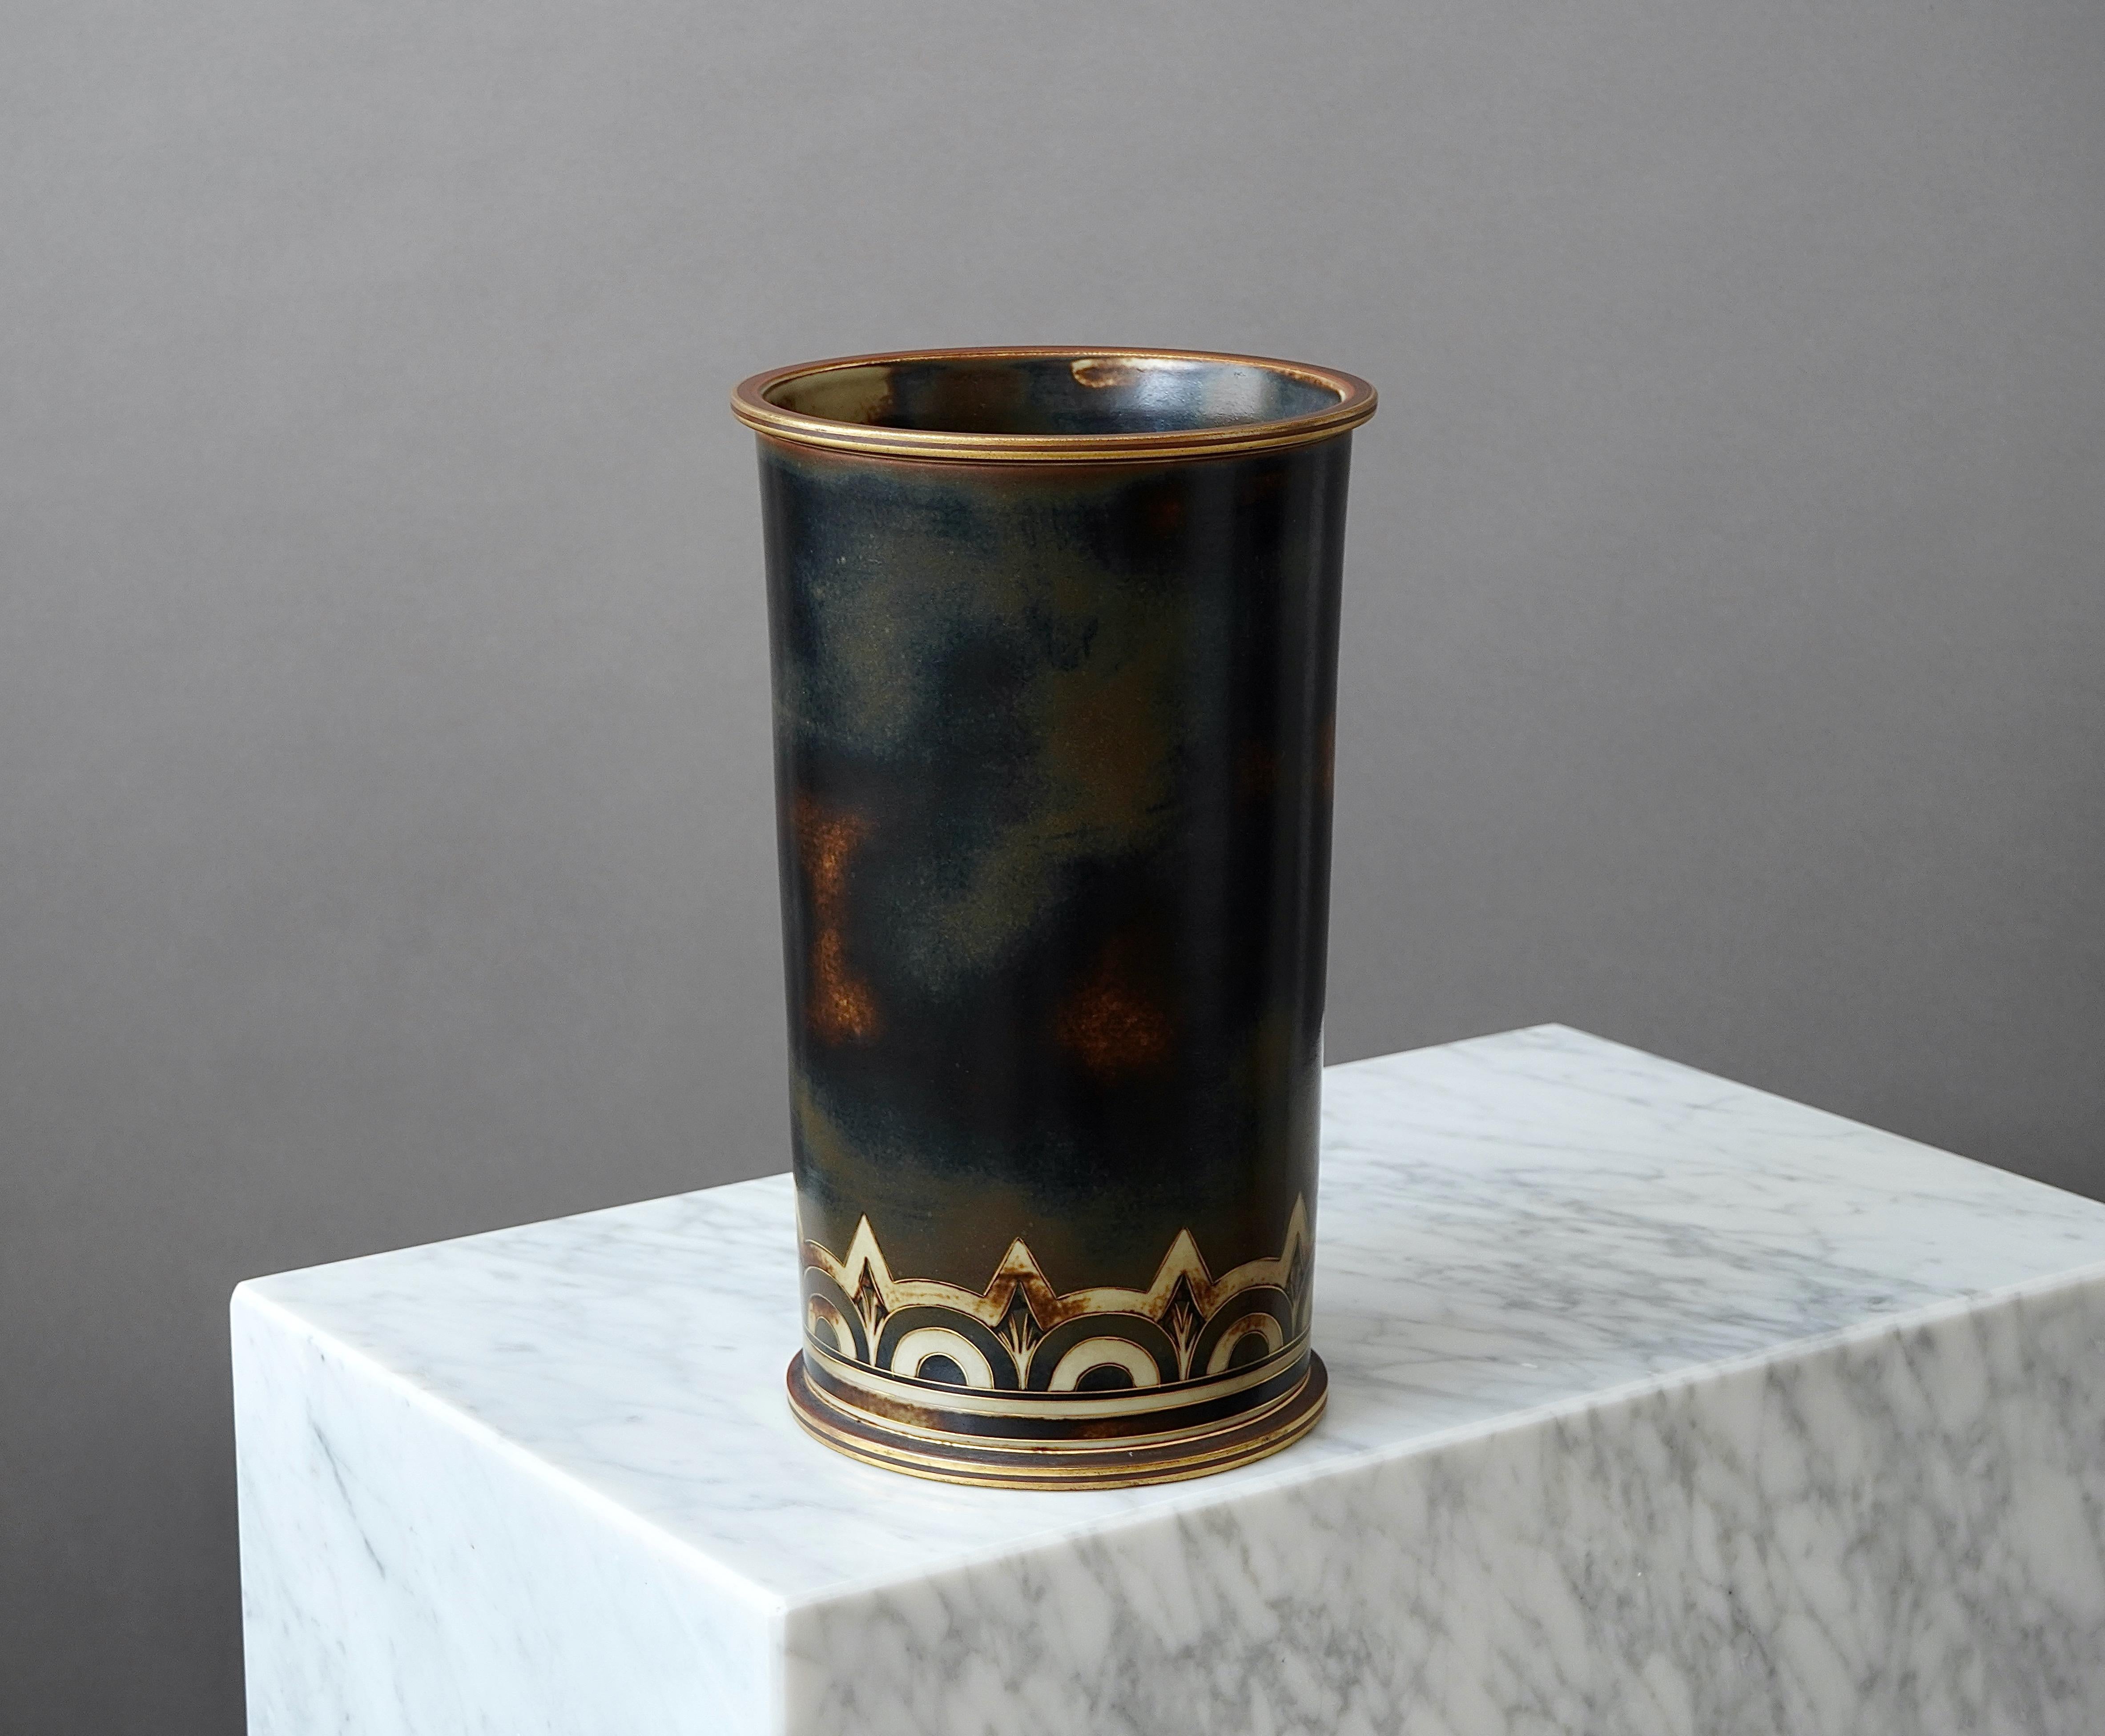 A large and unique stoneware art deco vase. Beautiful glaze with foot and mouth detailed in gold.
Designed by Gunnar Nylund for ALP (Lidköpings Porslinsfabrik), Sweden, 1930s.

Excellent condition.
Stamped 'ALP', 'FLAMBÉ', 'Lidköping, SWEDEN' and